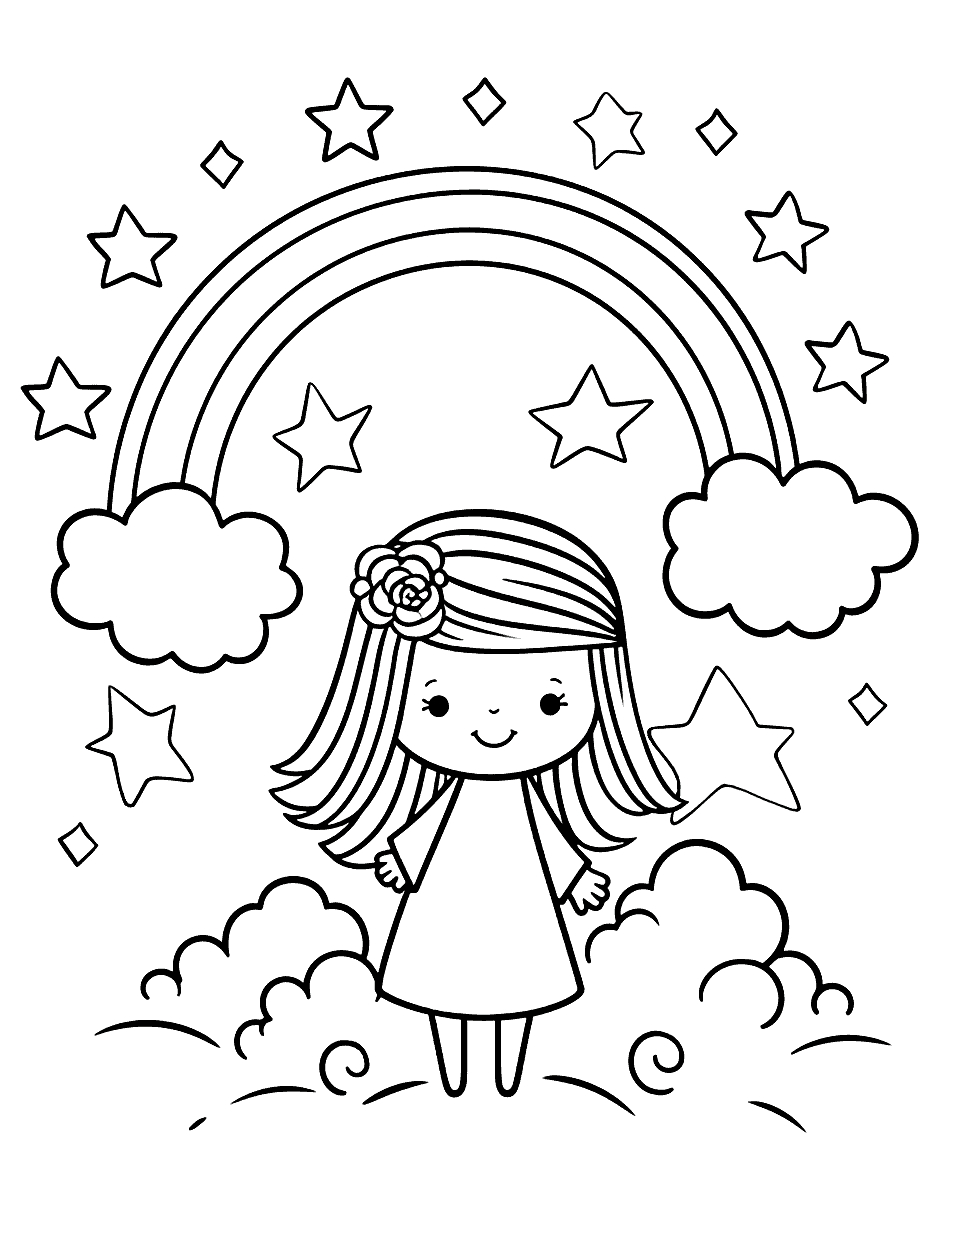 Fairy and Rainbow Coloring Page - A fairy sprinkling magic dust to create a beautiful rainbow.